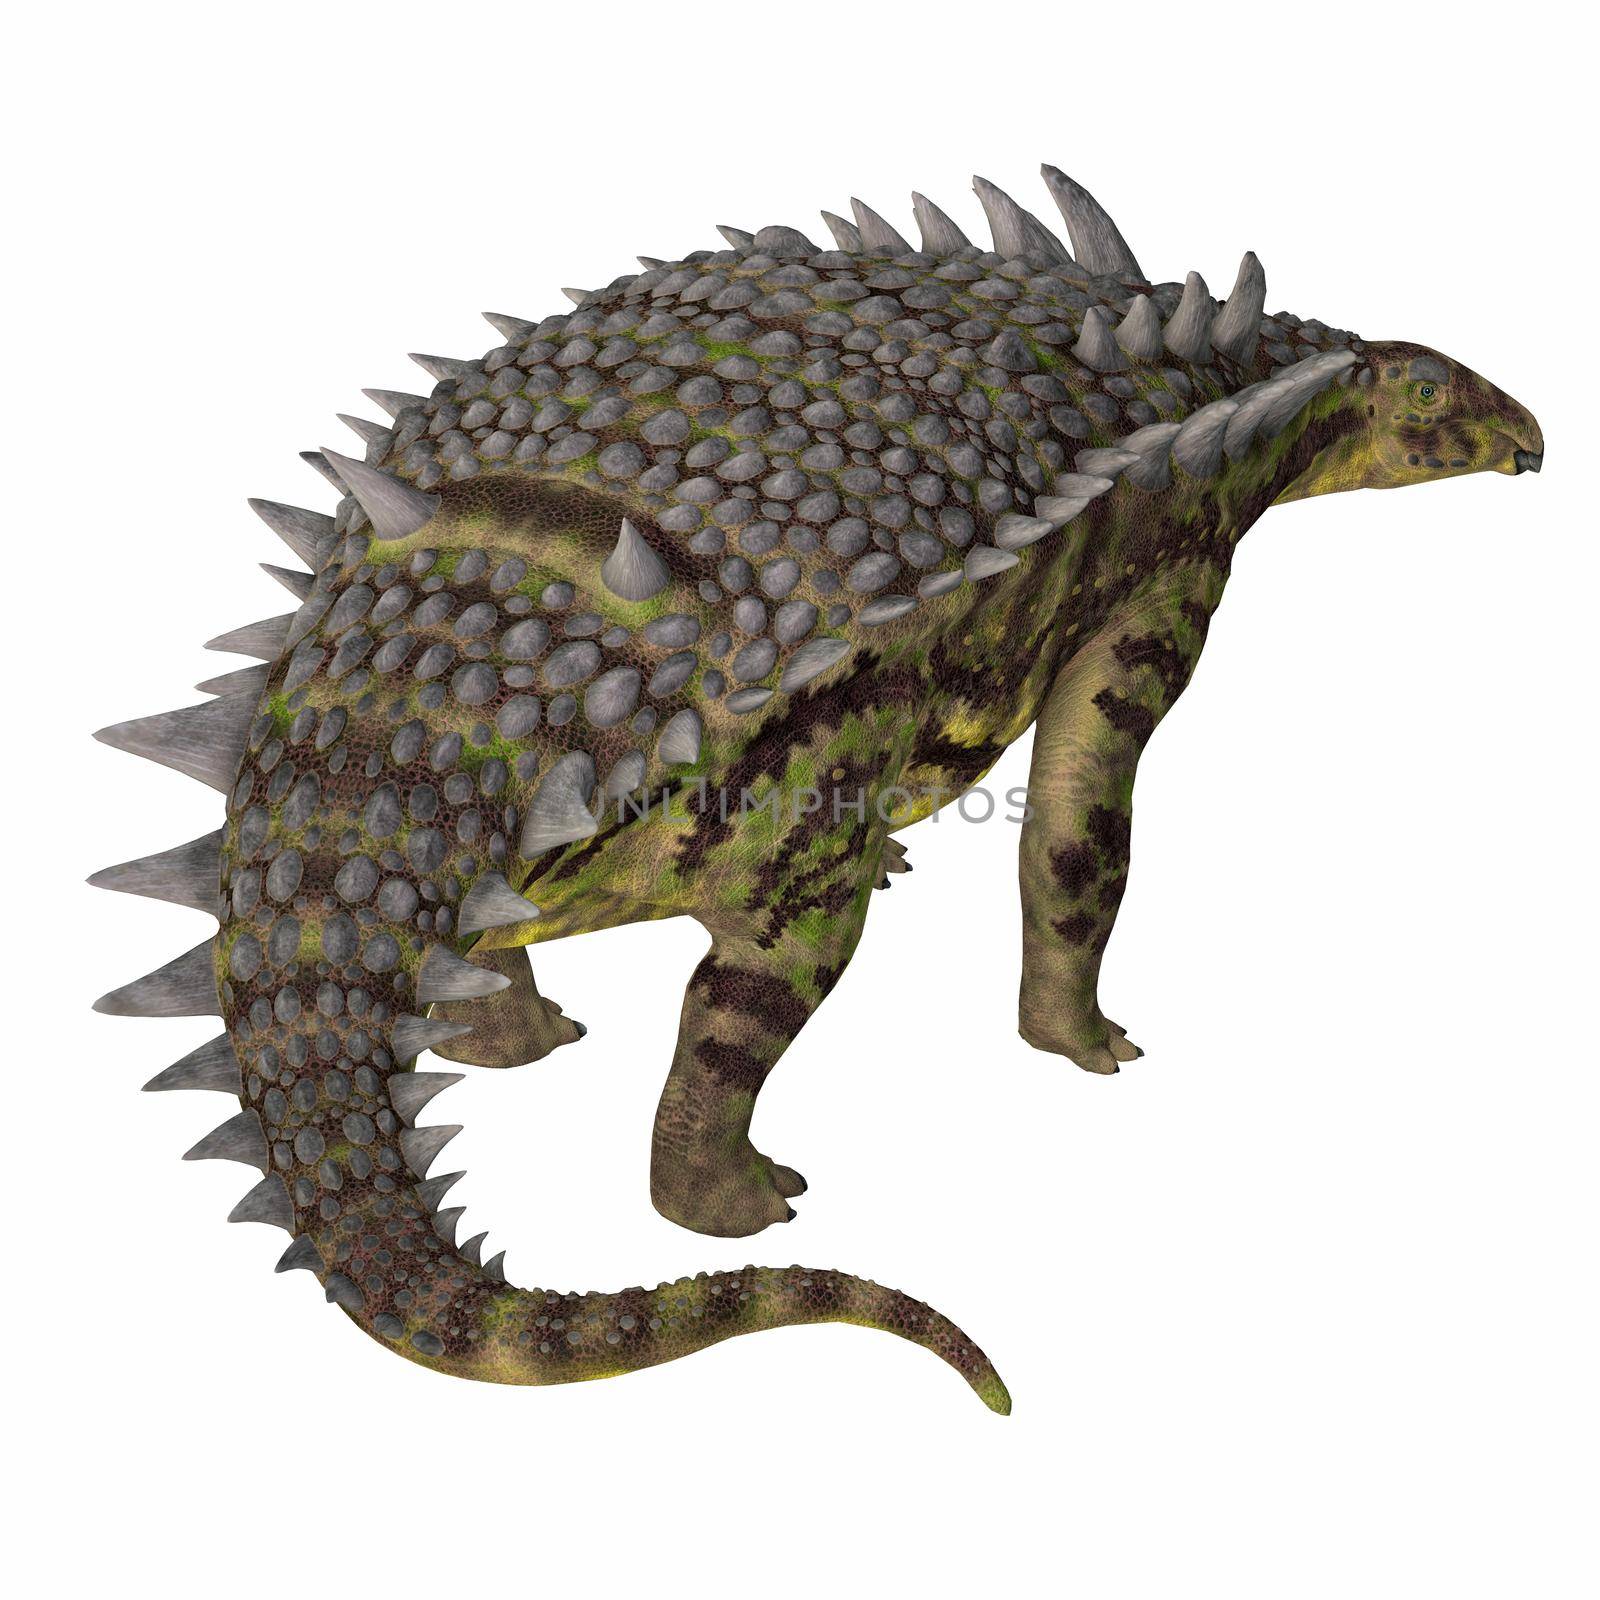 Hungarosaurus was a herbivorous armored Ankylosaur dinosaur that lived in Hungary during the Cretaceous Period.